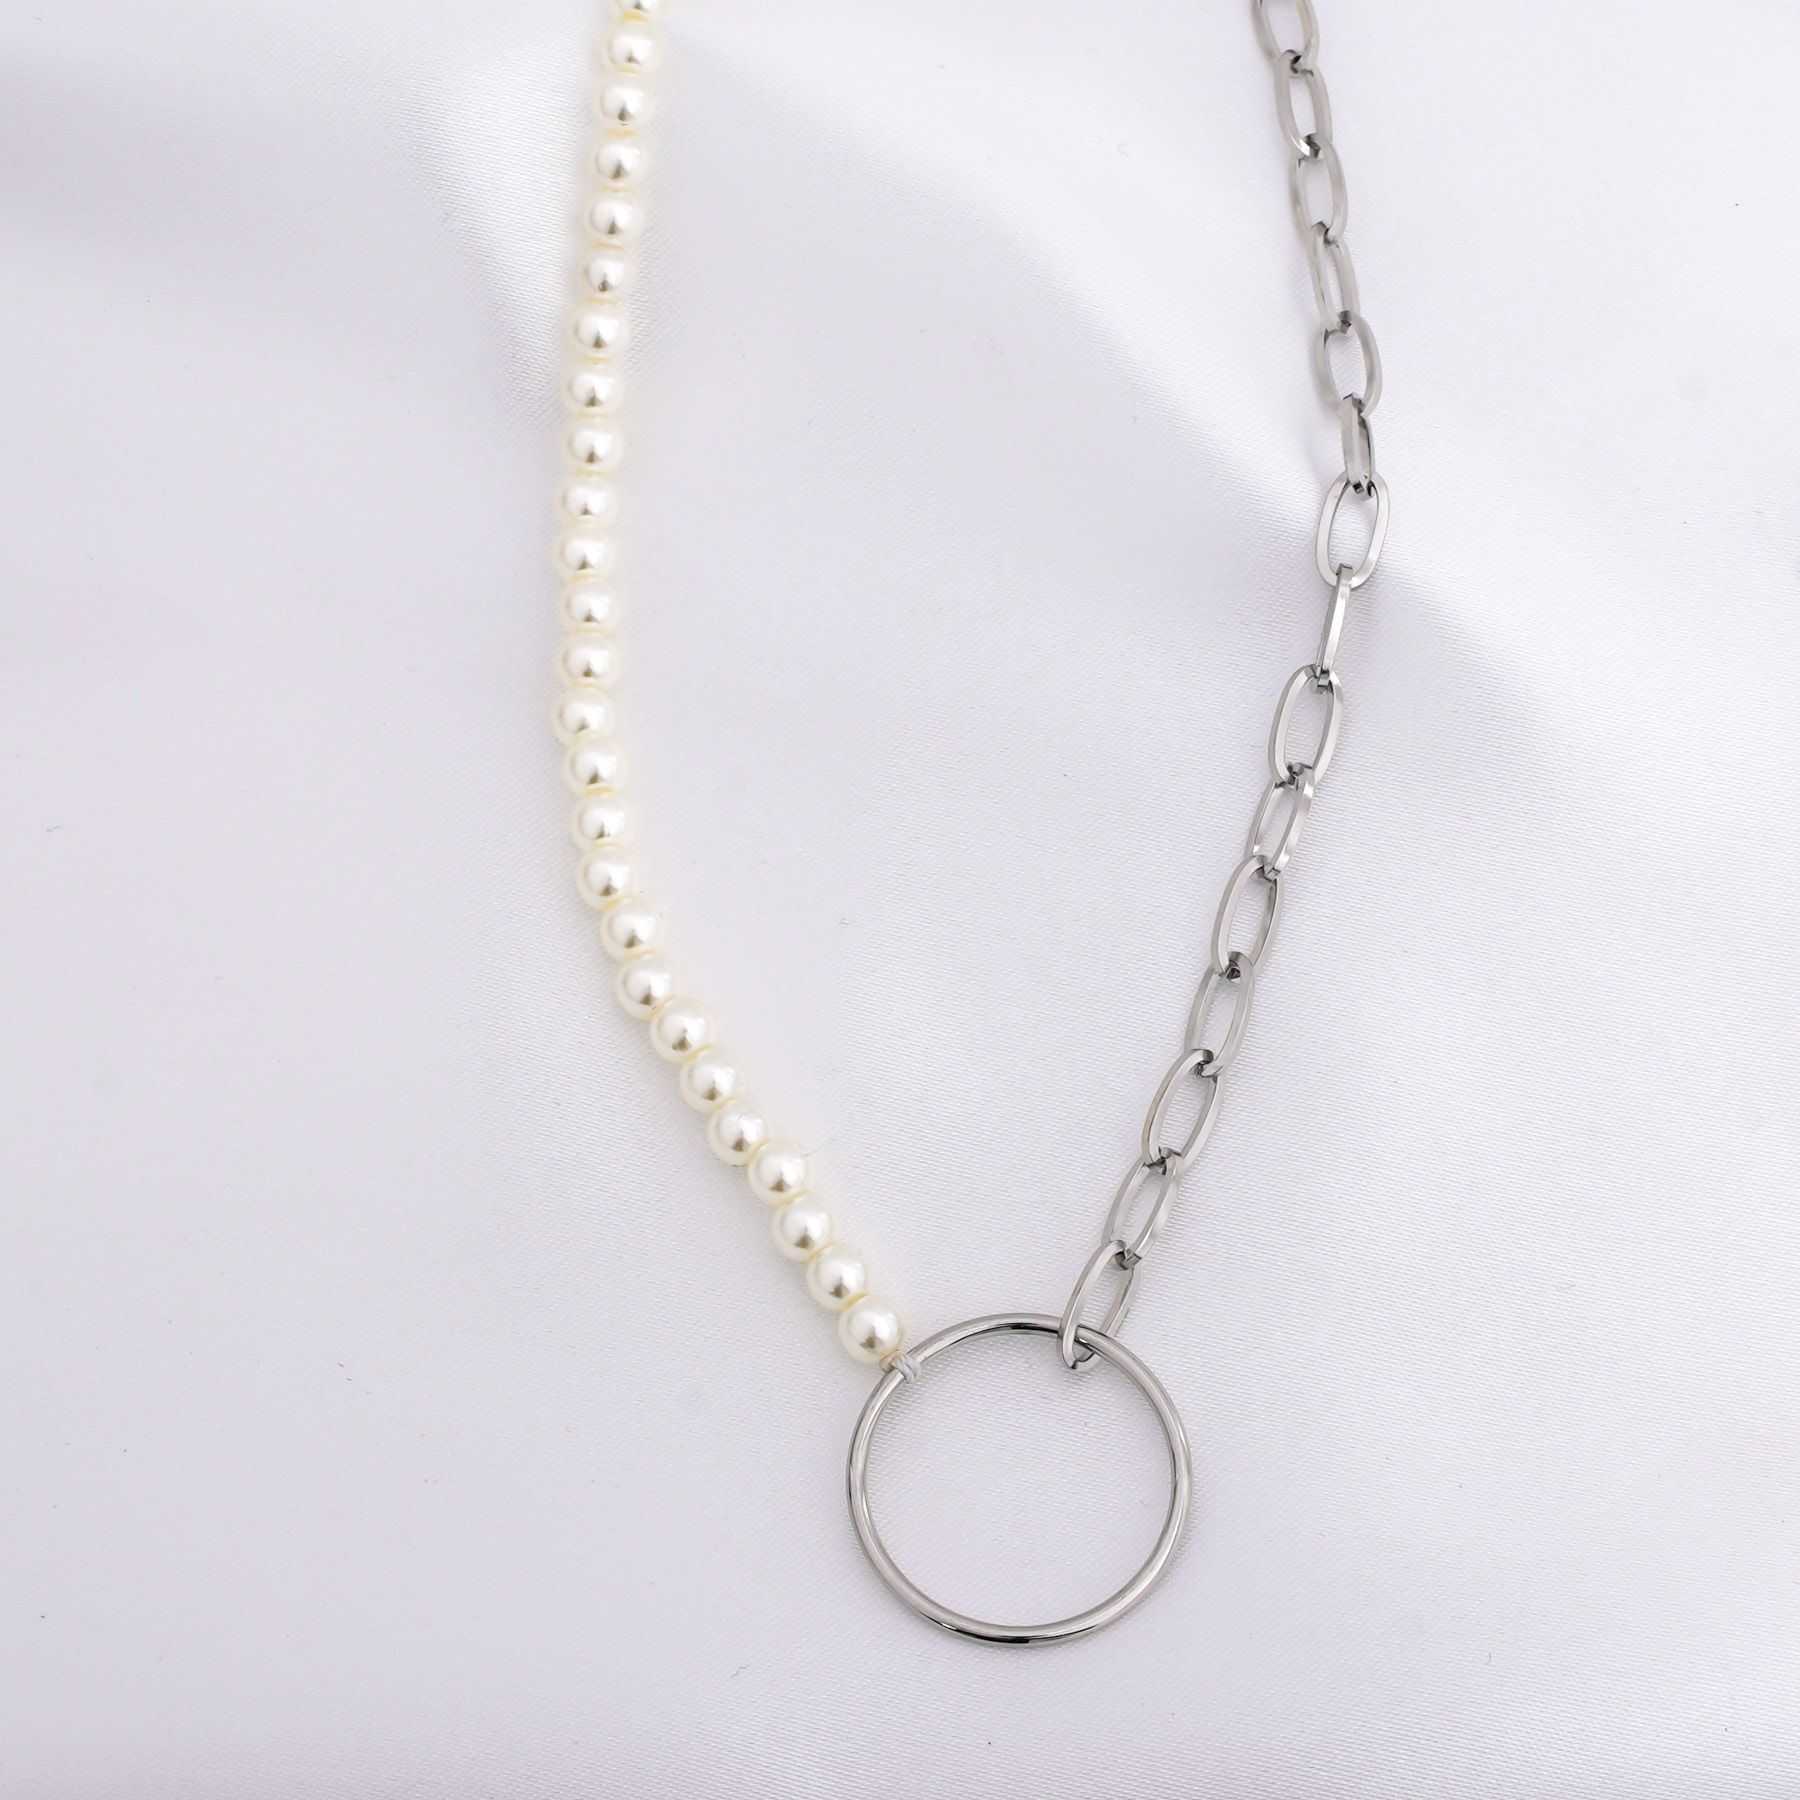 MYSELF NECKLACE - SILVER